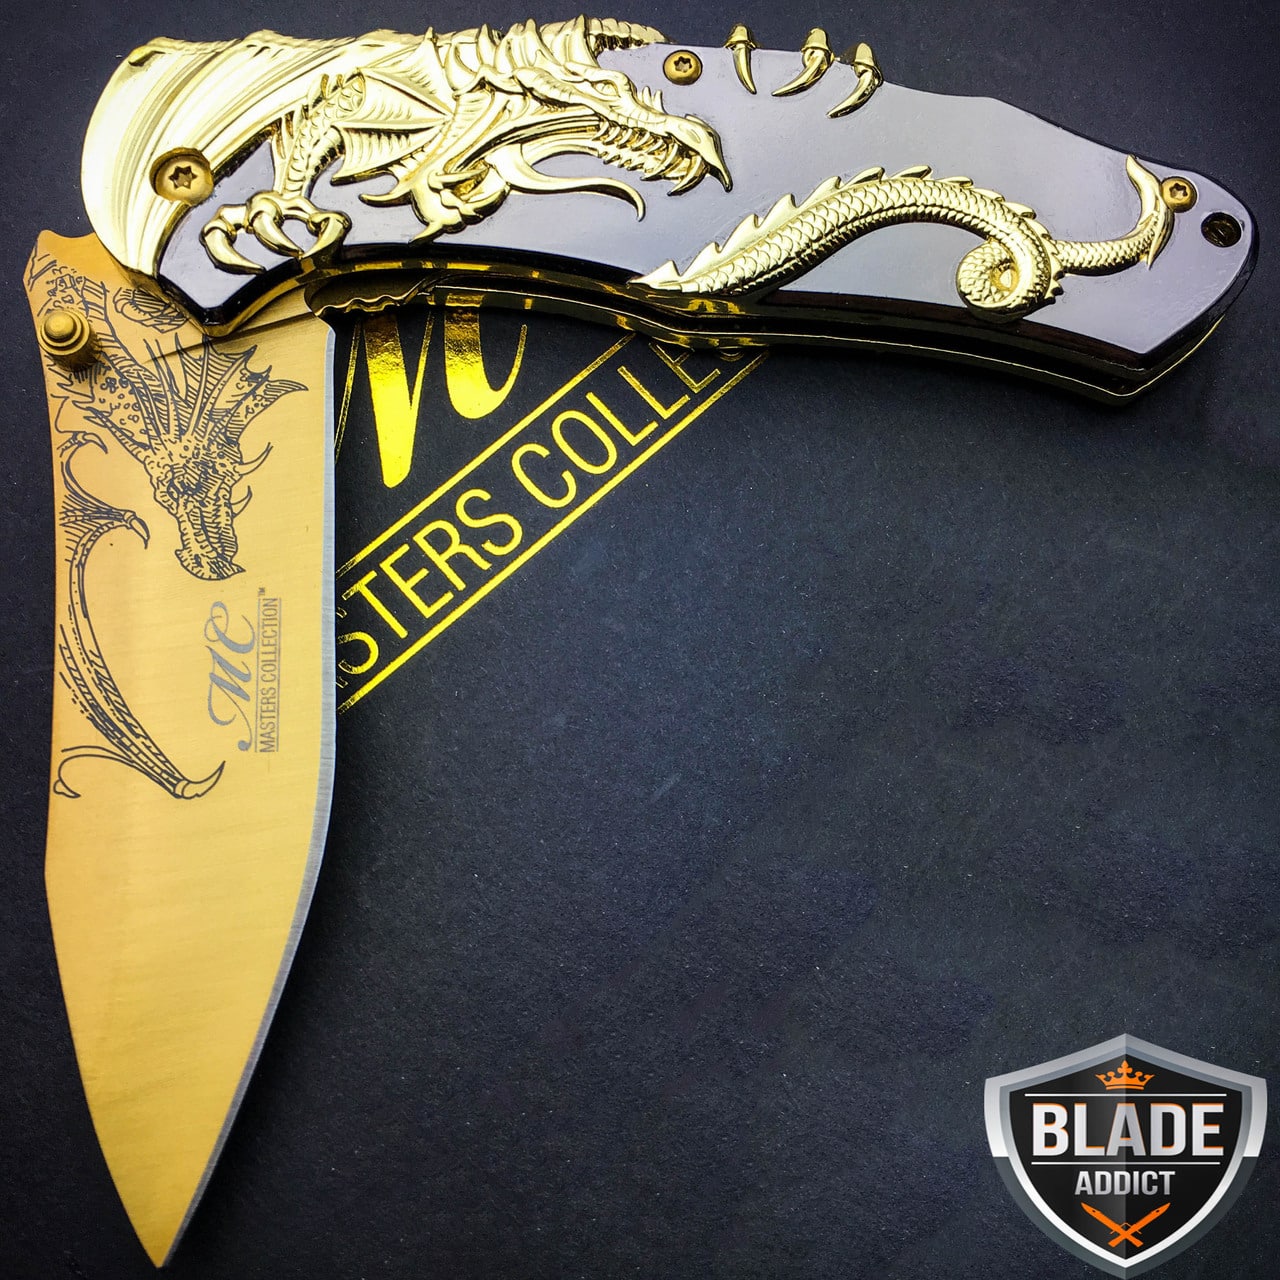 8" Gold Dragon Titanium Spring Assisted Open Blade Folding Pocket Knife Limited Edition